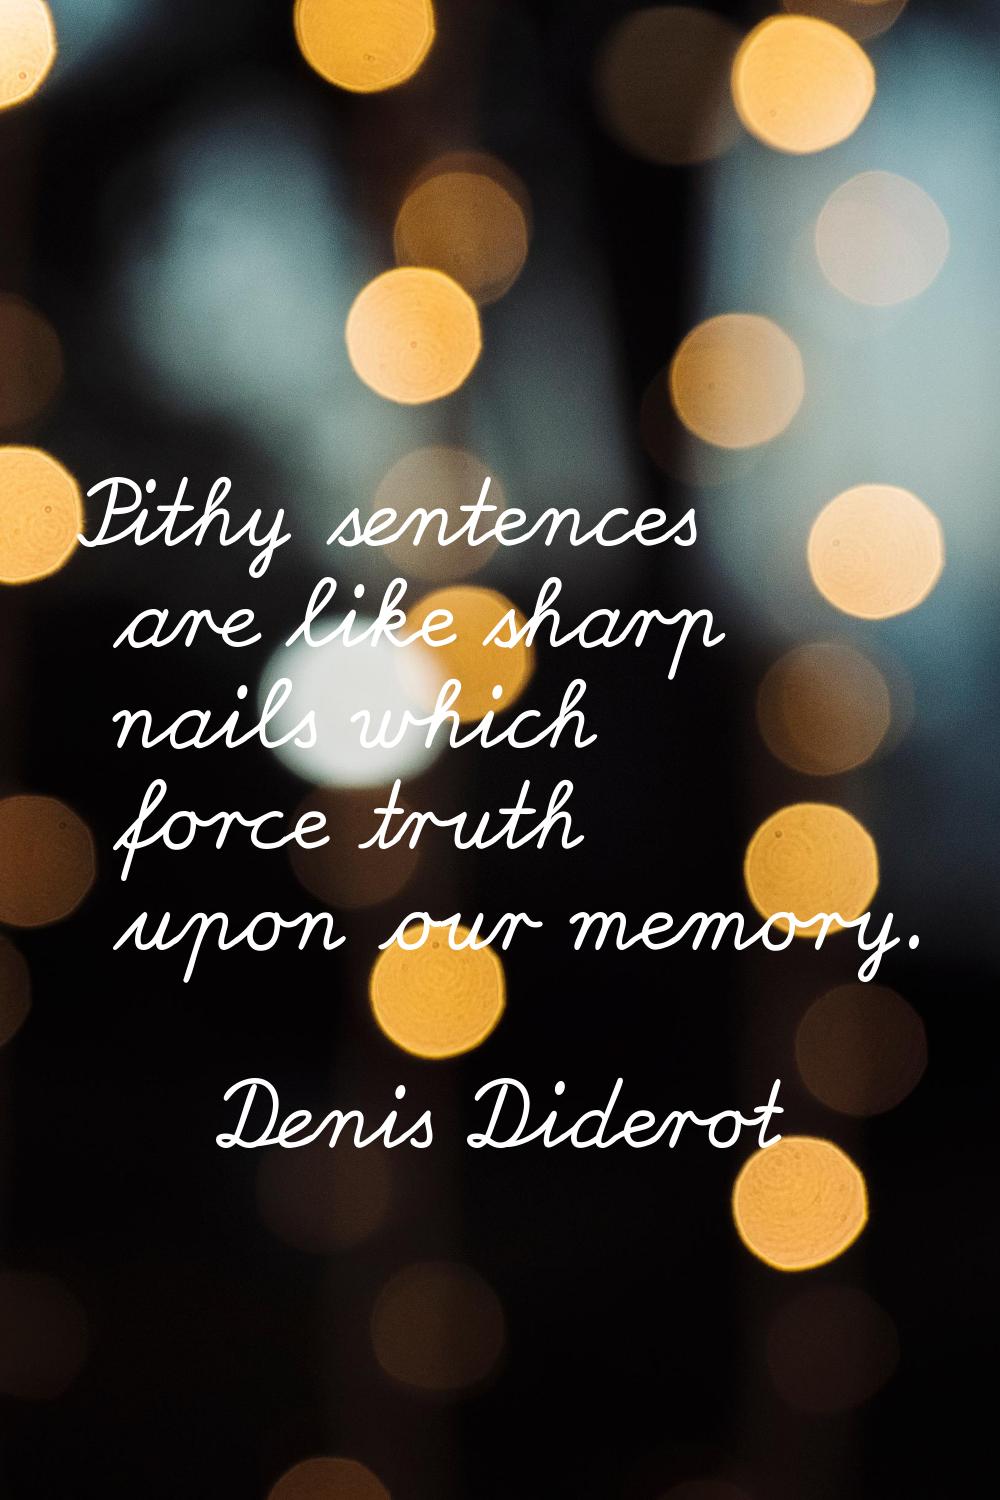 Pithy sentences are like sharp nails which force truth upon our memory.